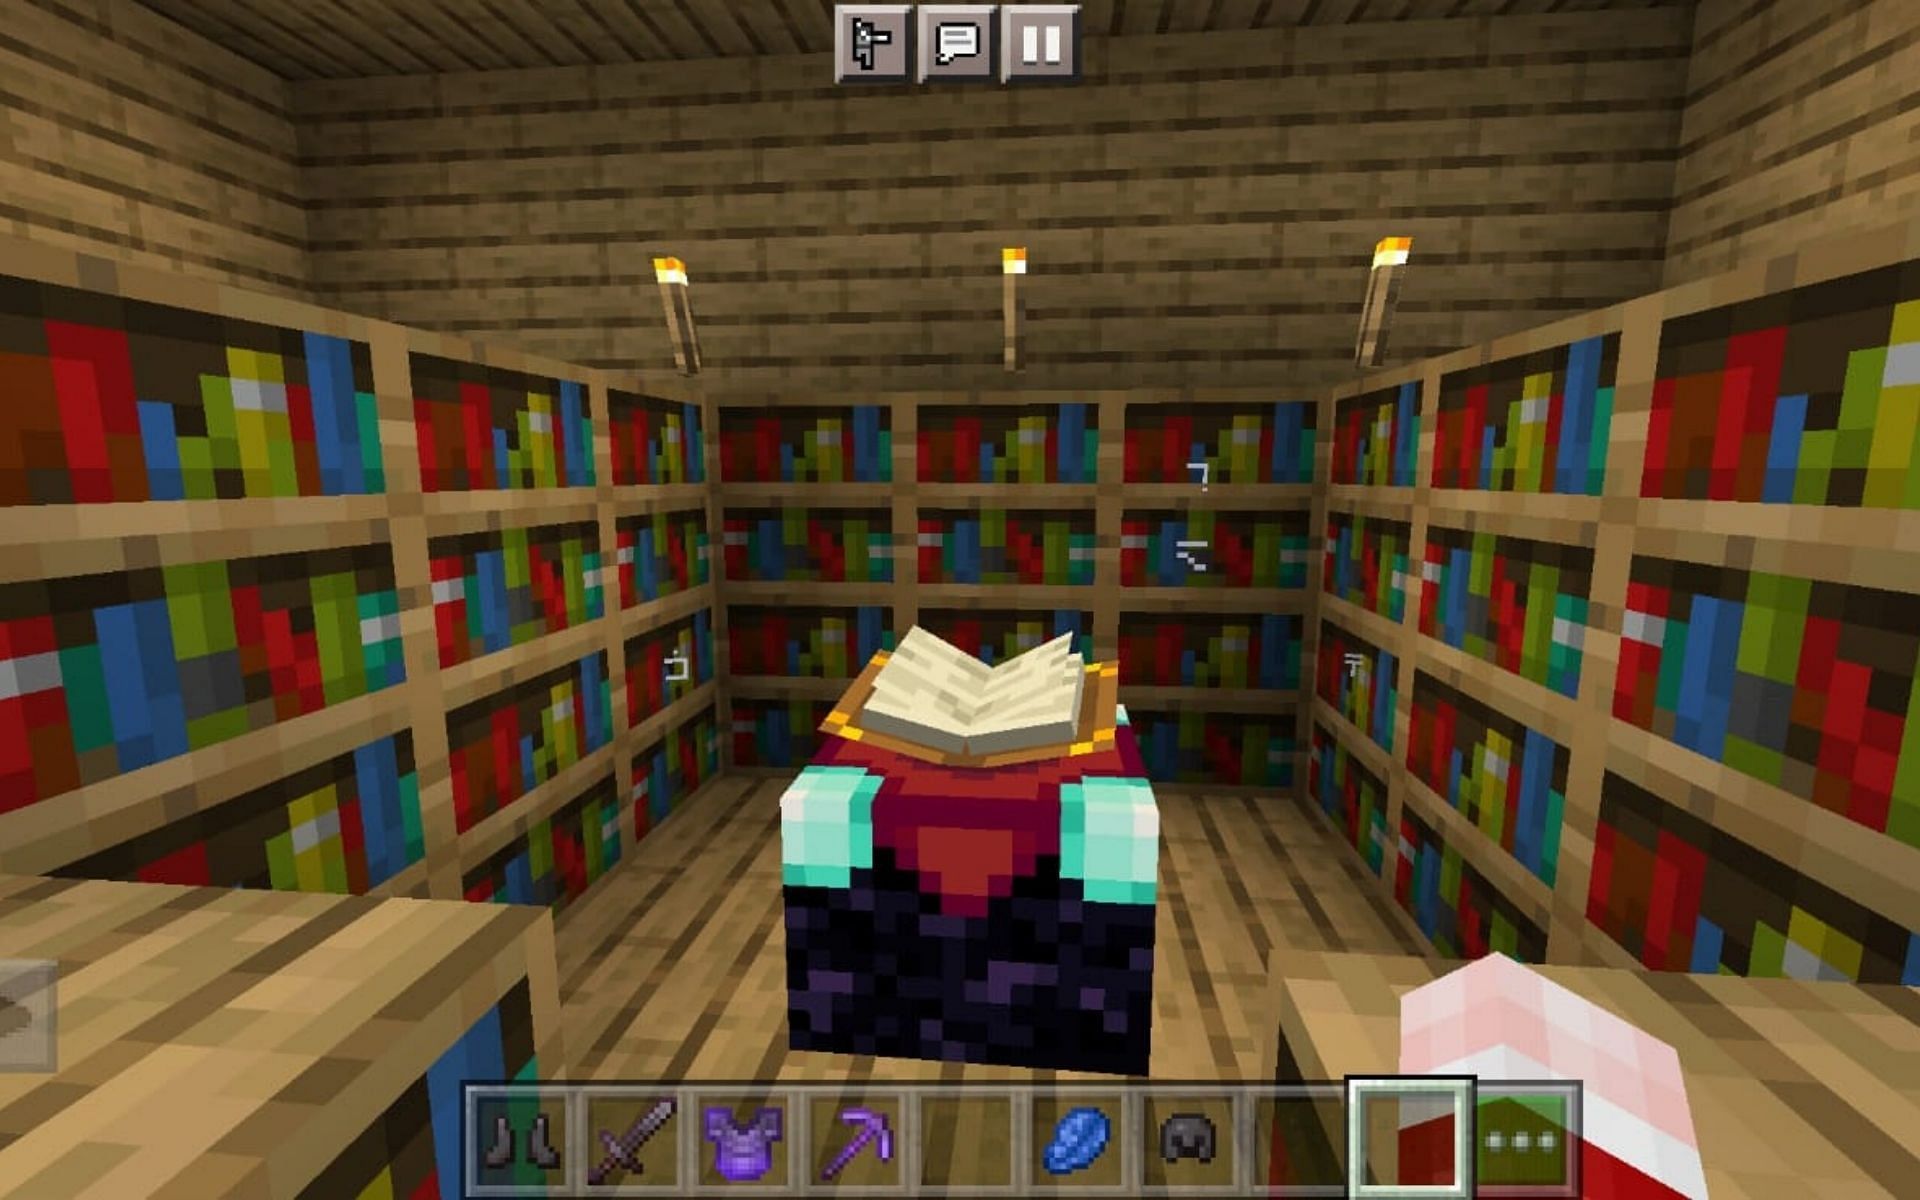 Enchanting table surrounded by bookshelves (Image via Minecraft)